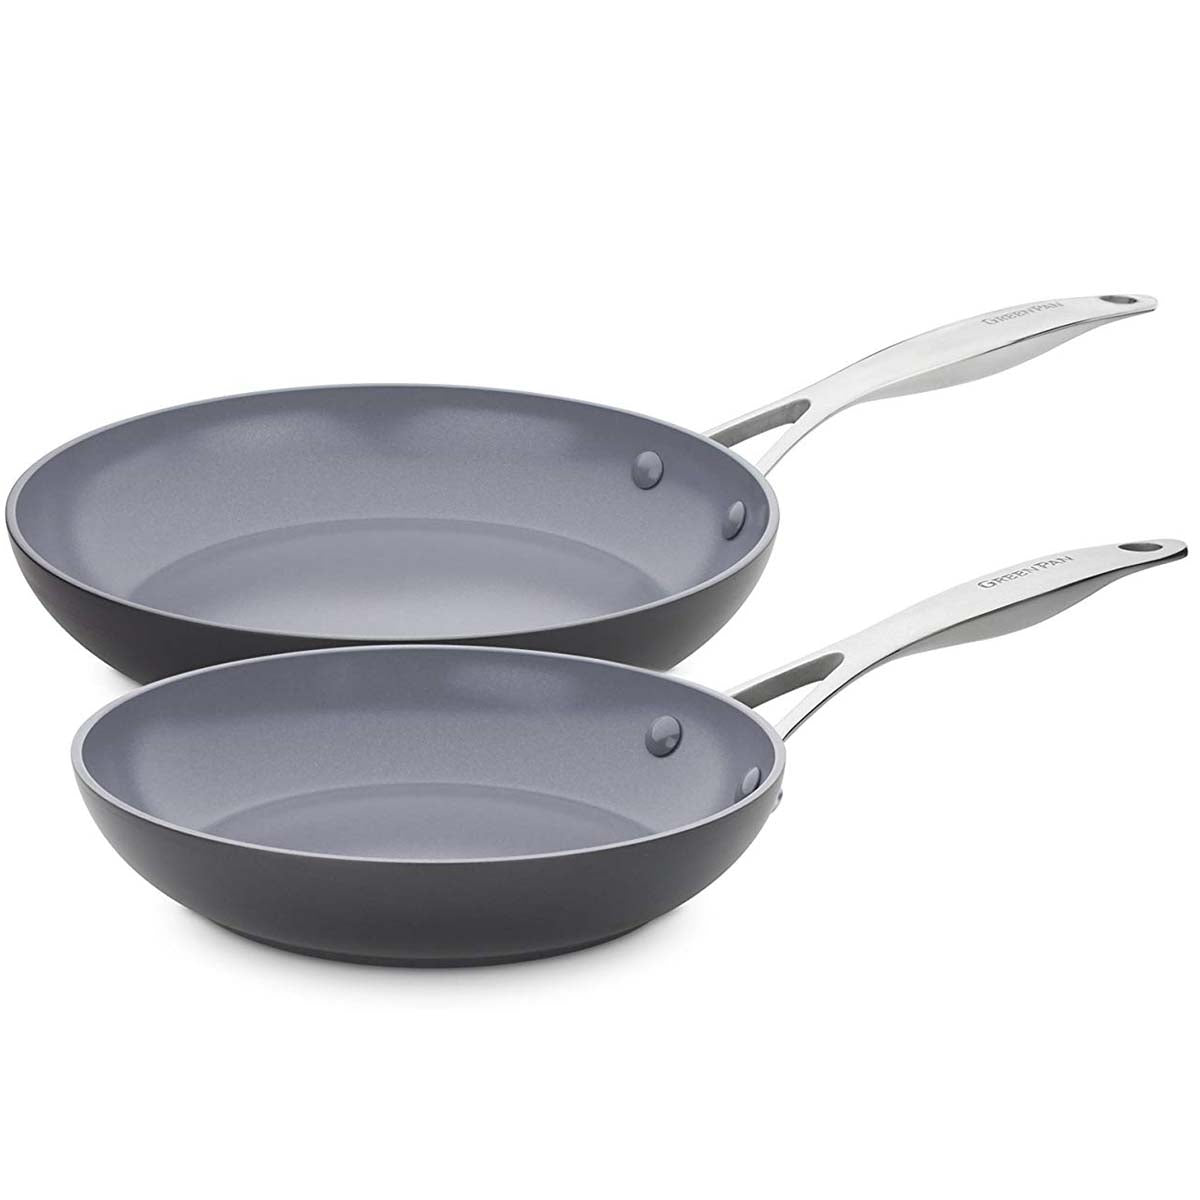 Ceramic Professional Non-Stick 2-Piece Frypan Set, 8 in. and 10 in.